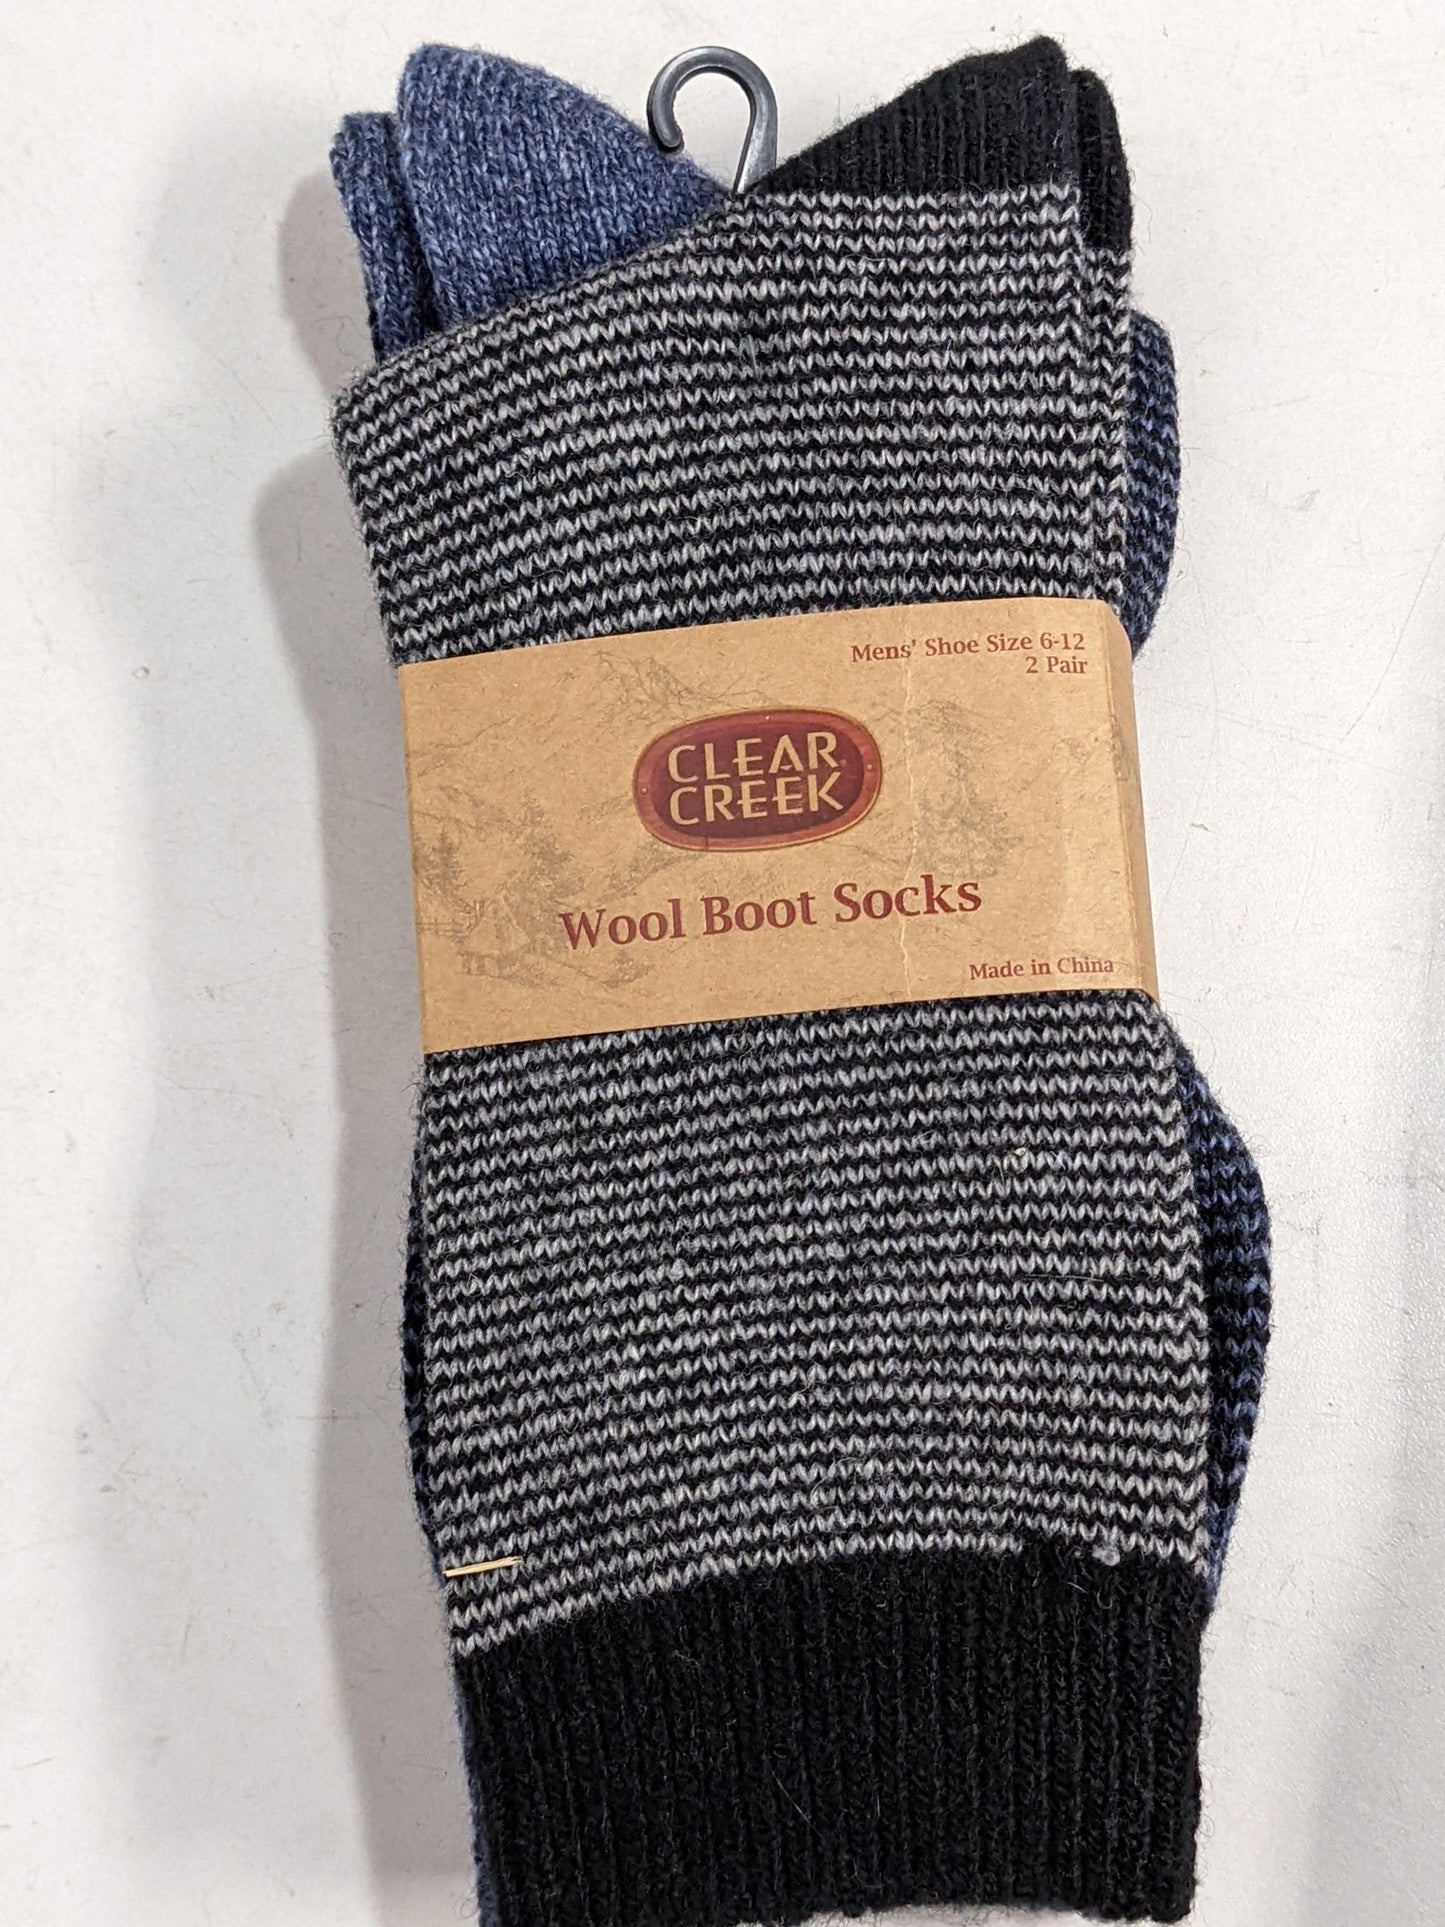 Clear Creek Wool Boot Socks Men's Size 6-12 Assorted colors New